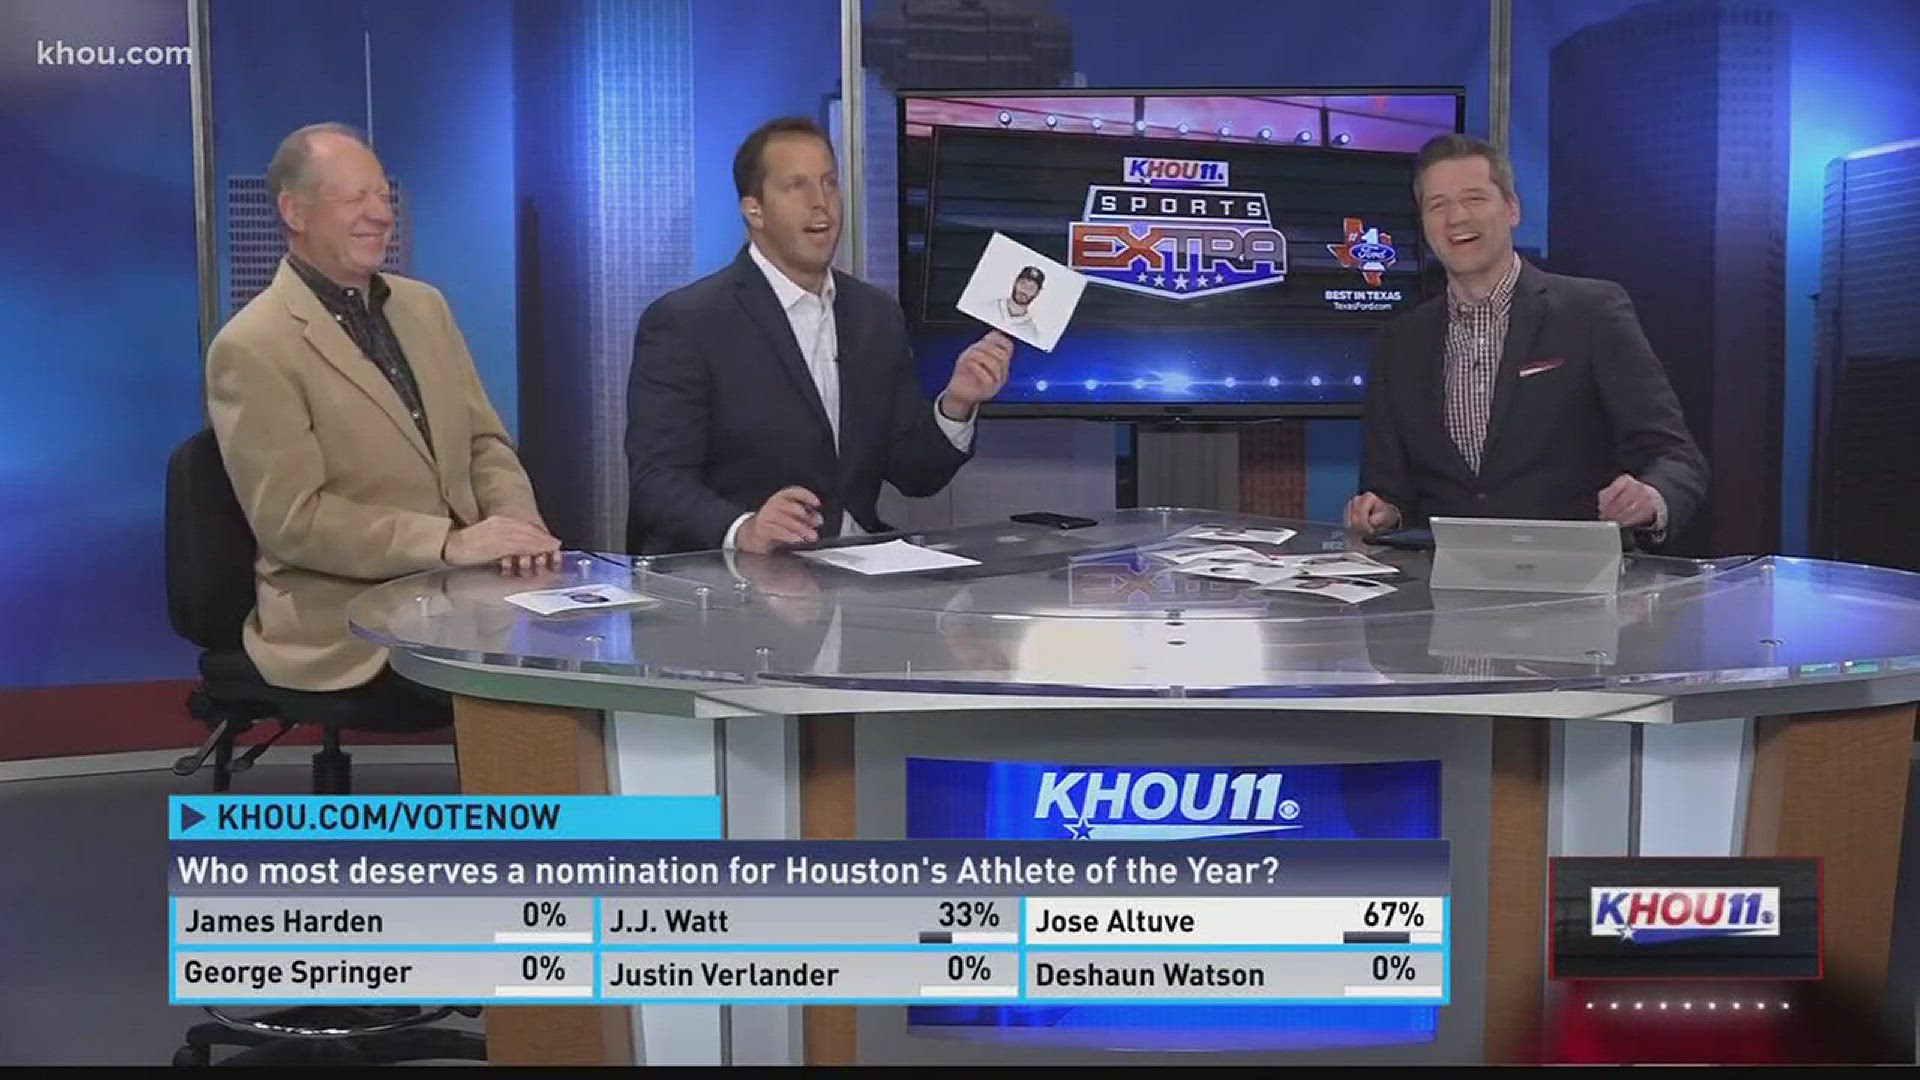 KHOU 11 anchor Jason Bristol talks with sports reporter Matt Musil, and Seth Payne from Sports Radio 610 about who should be Houston's Athlete of the Year.